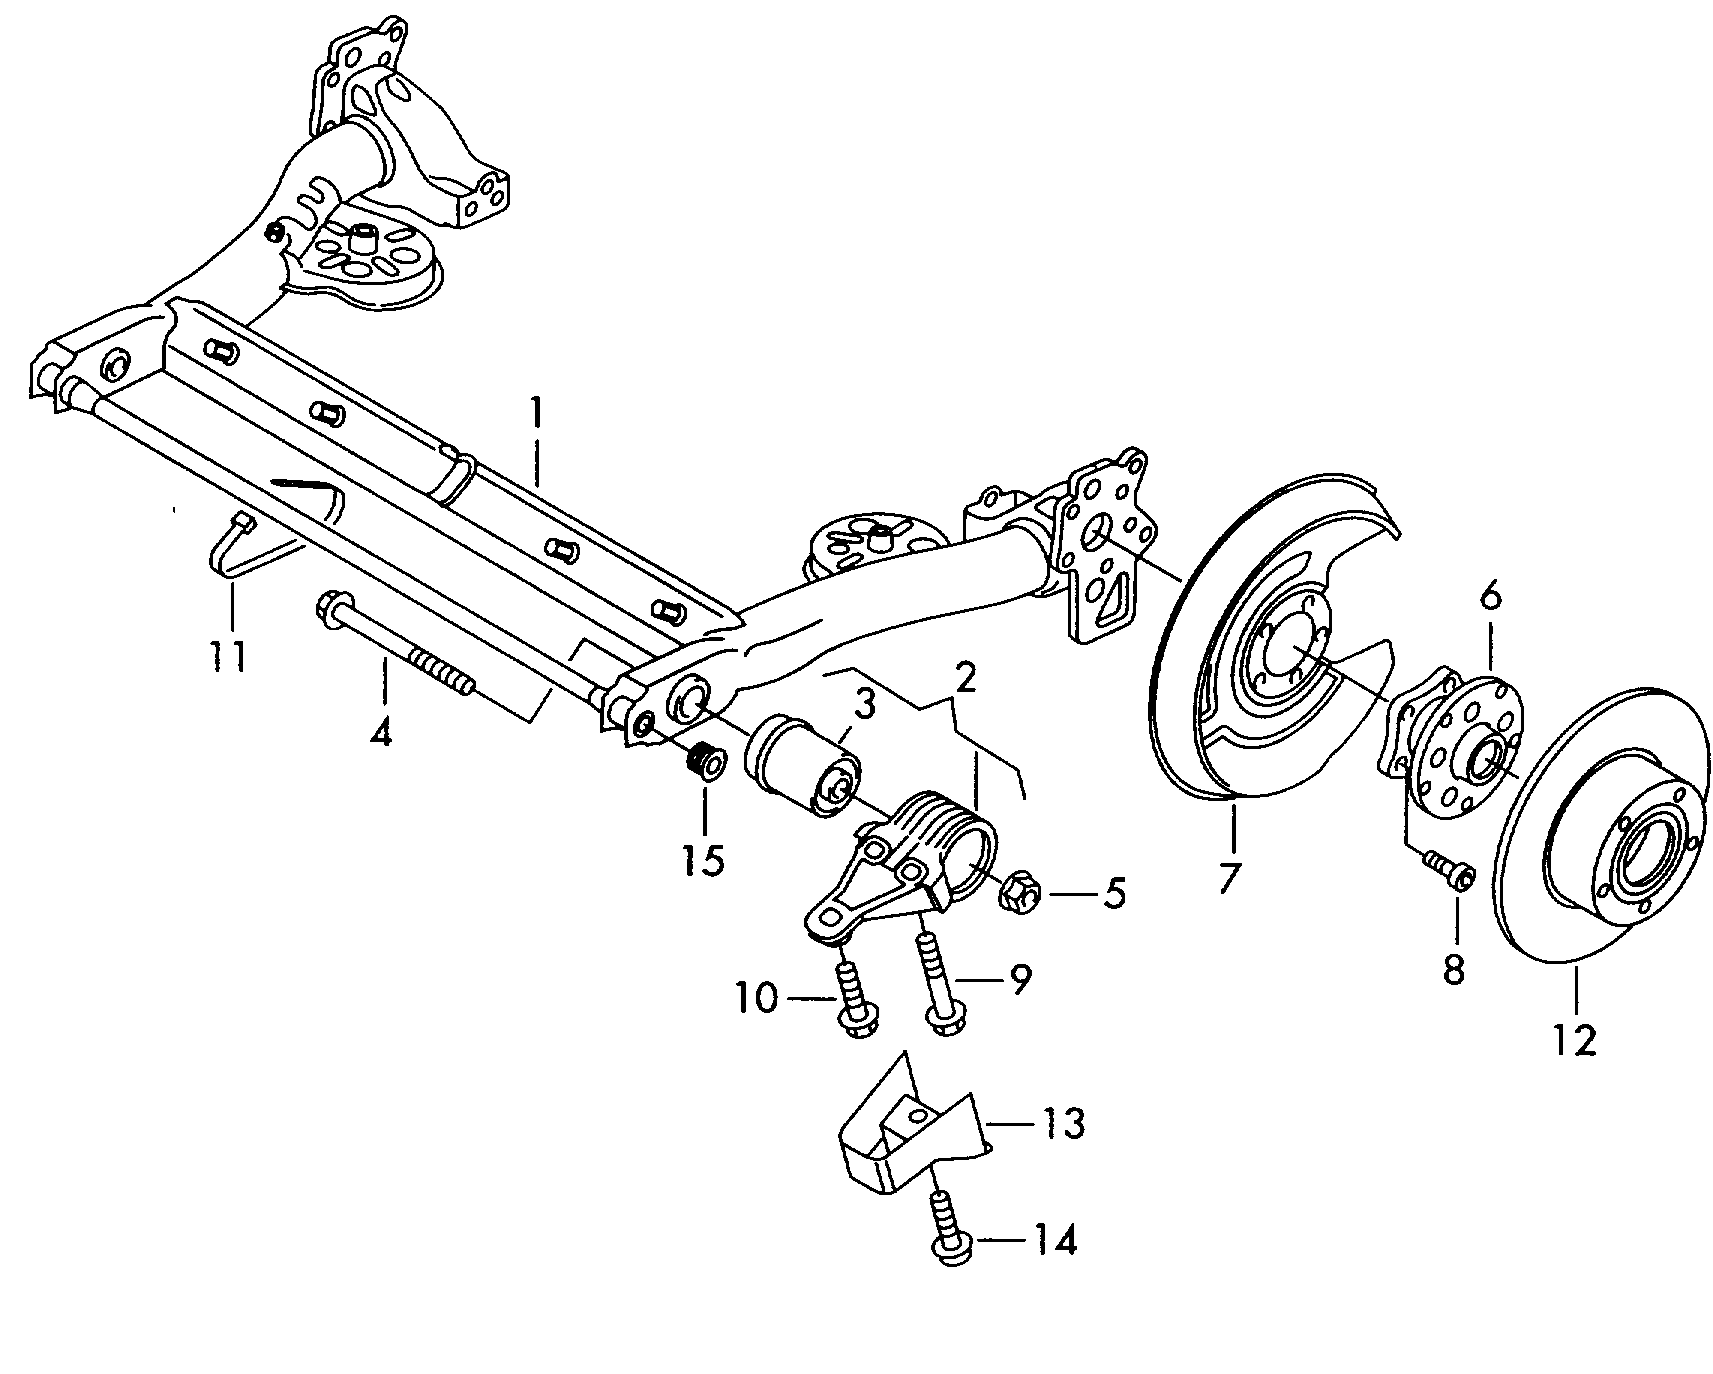 rear axle beam with attachment
parts - Audi A6/Avant(A6)  